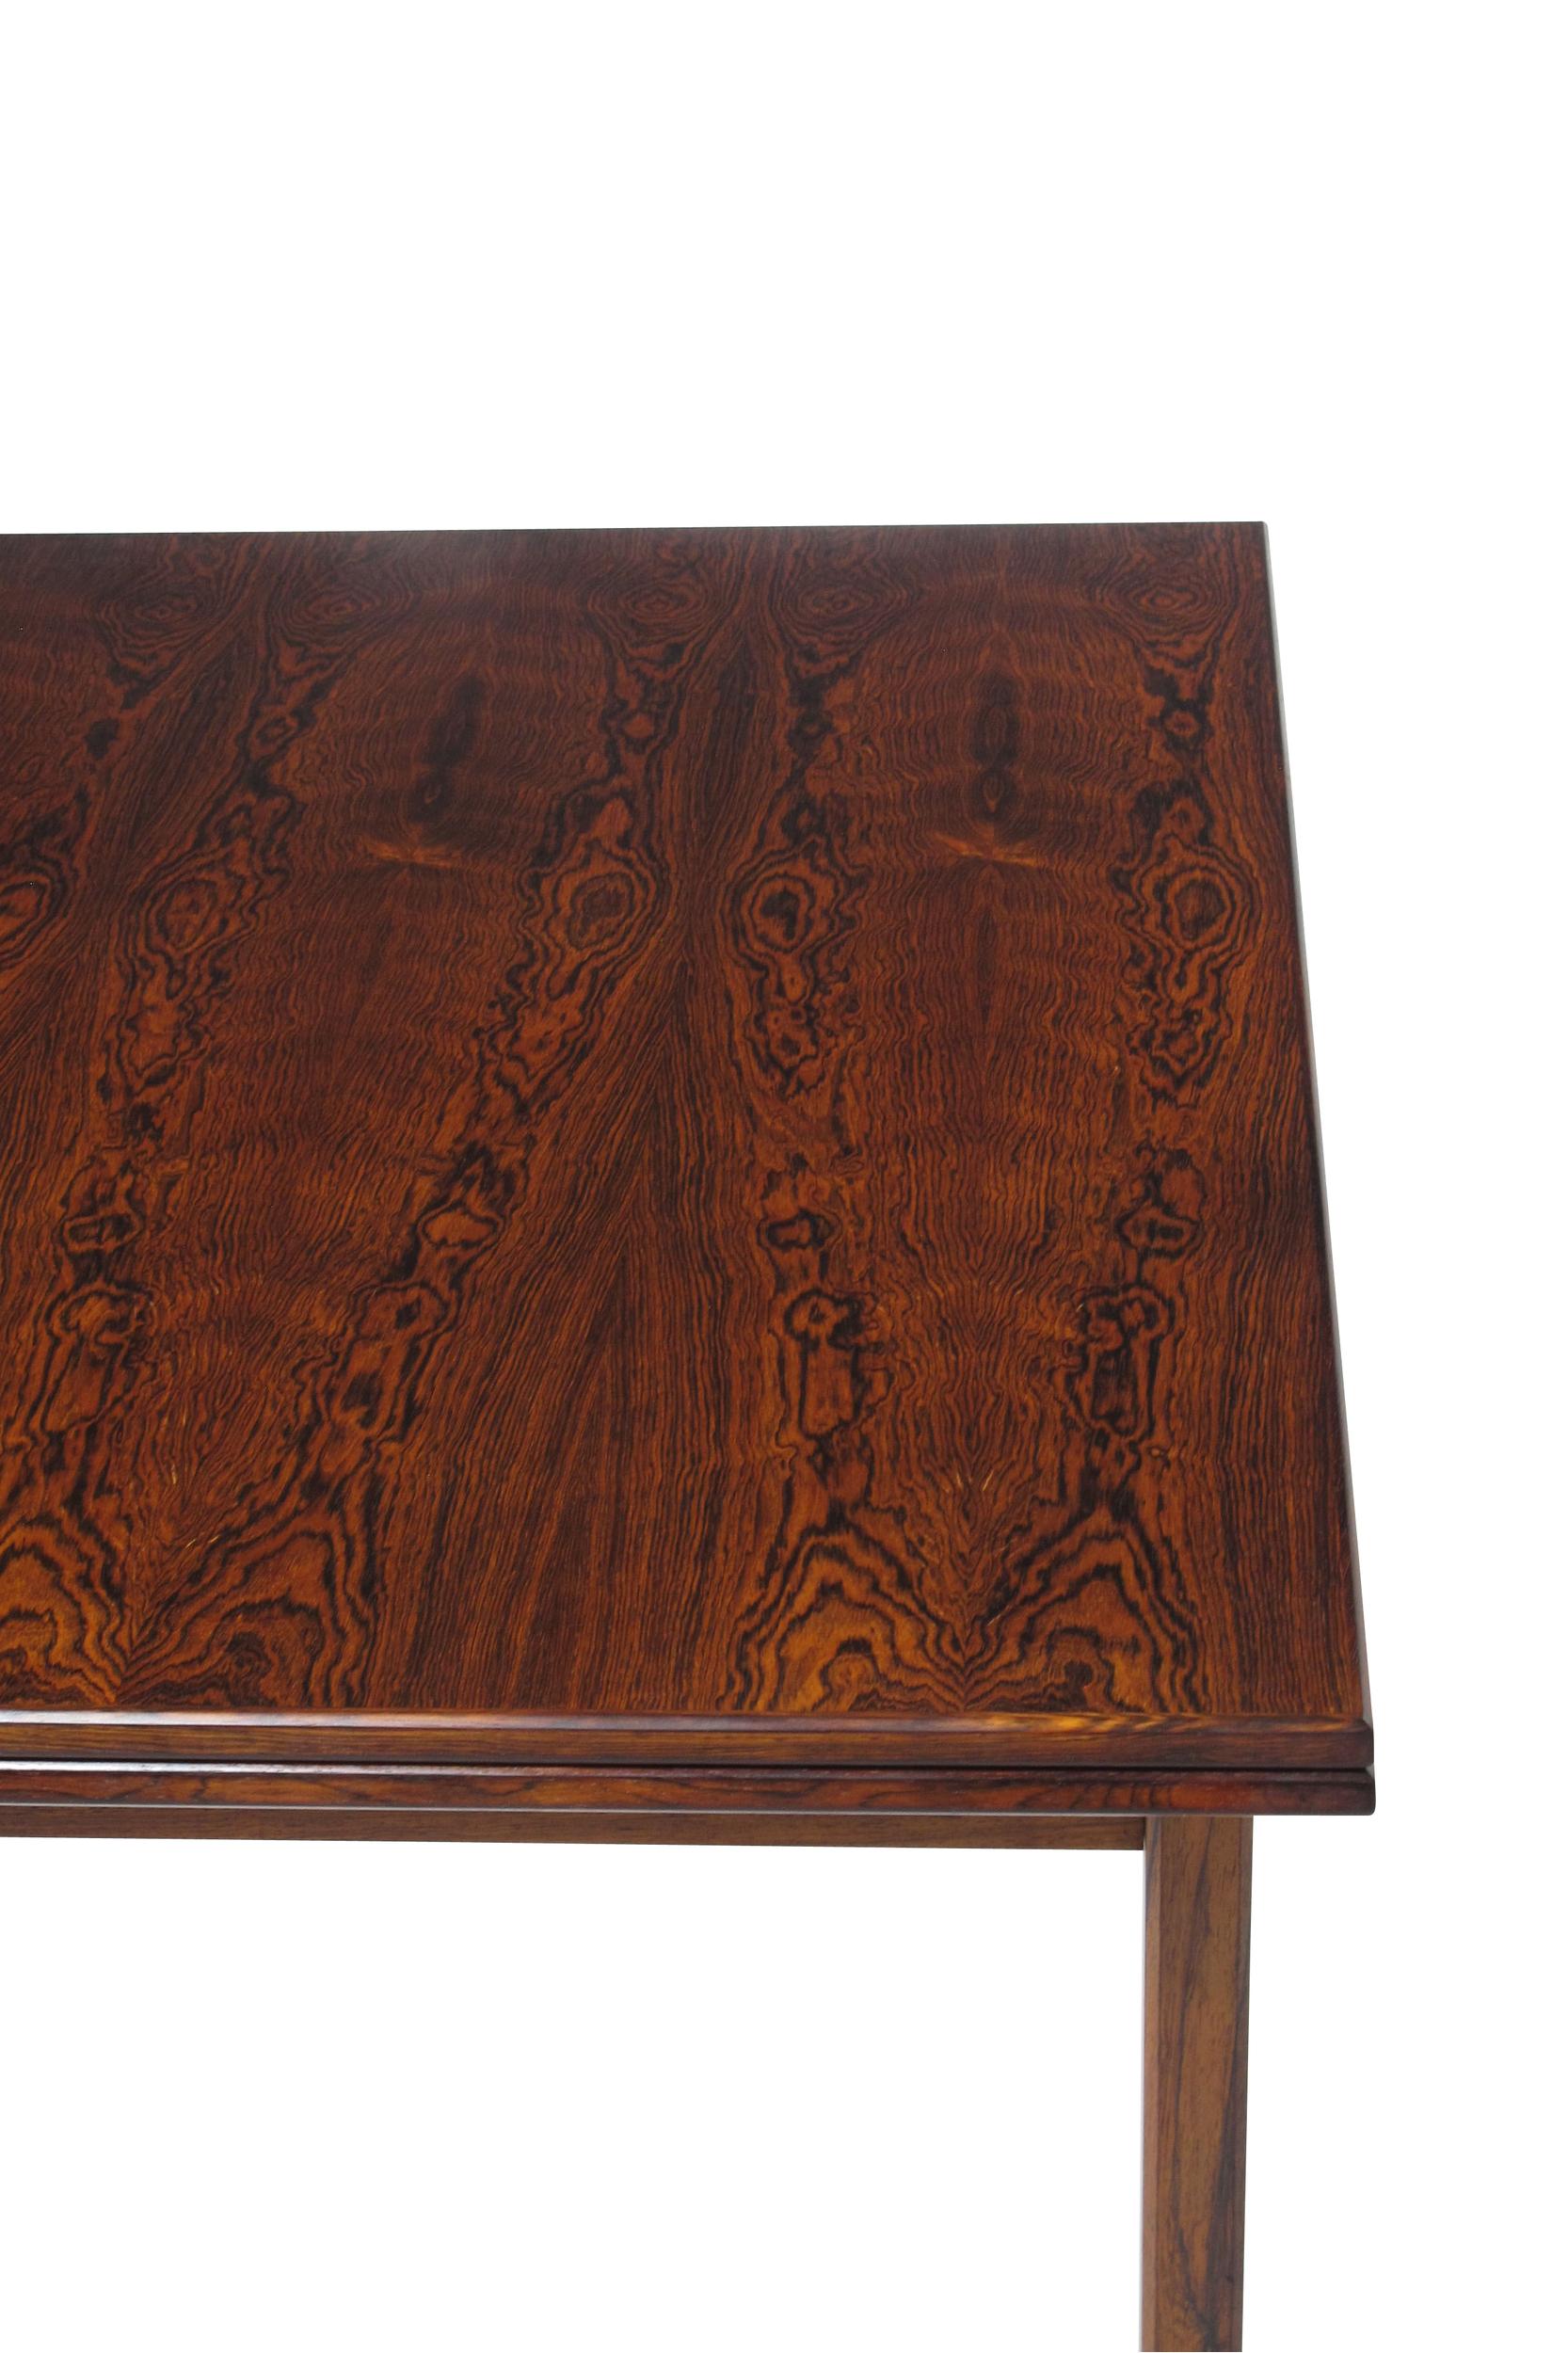 Midcentury Brazilian Rosewood Dining with Dramatic Grain 1